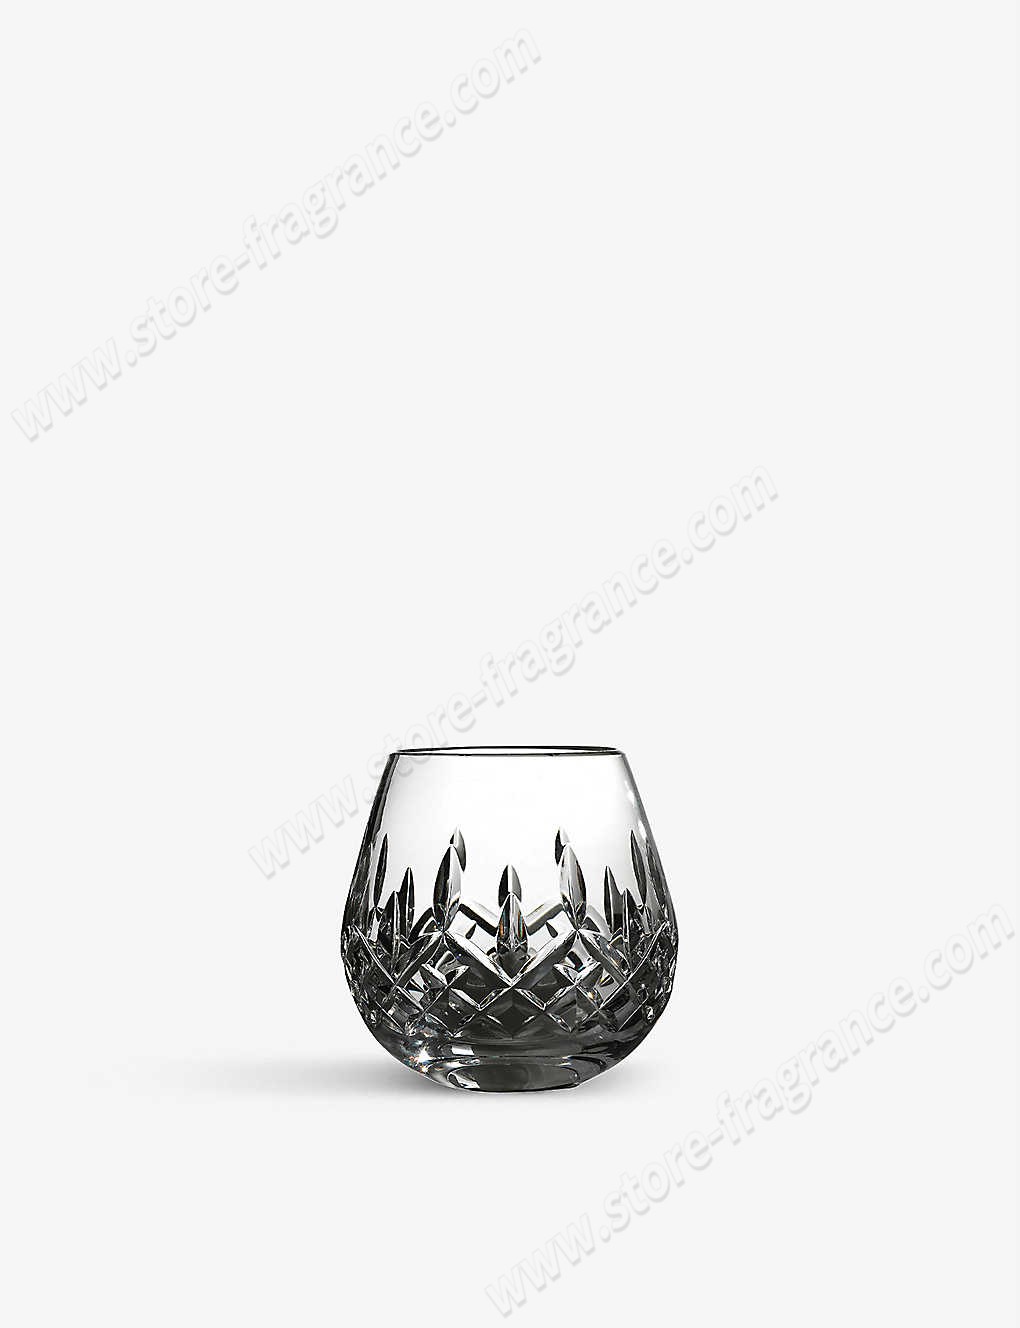 WATERFORD/Lismore crystal glass votive 9cm ✿ Discount Store - WATERFORD/Lismore crystal glass votive 9cm ✿ Discount Store